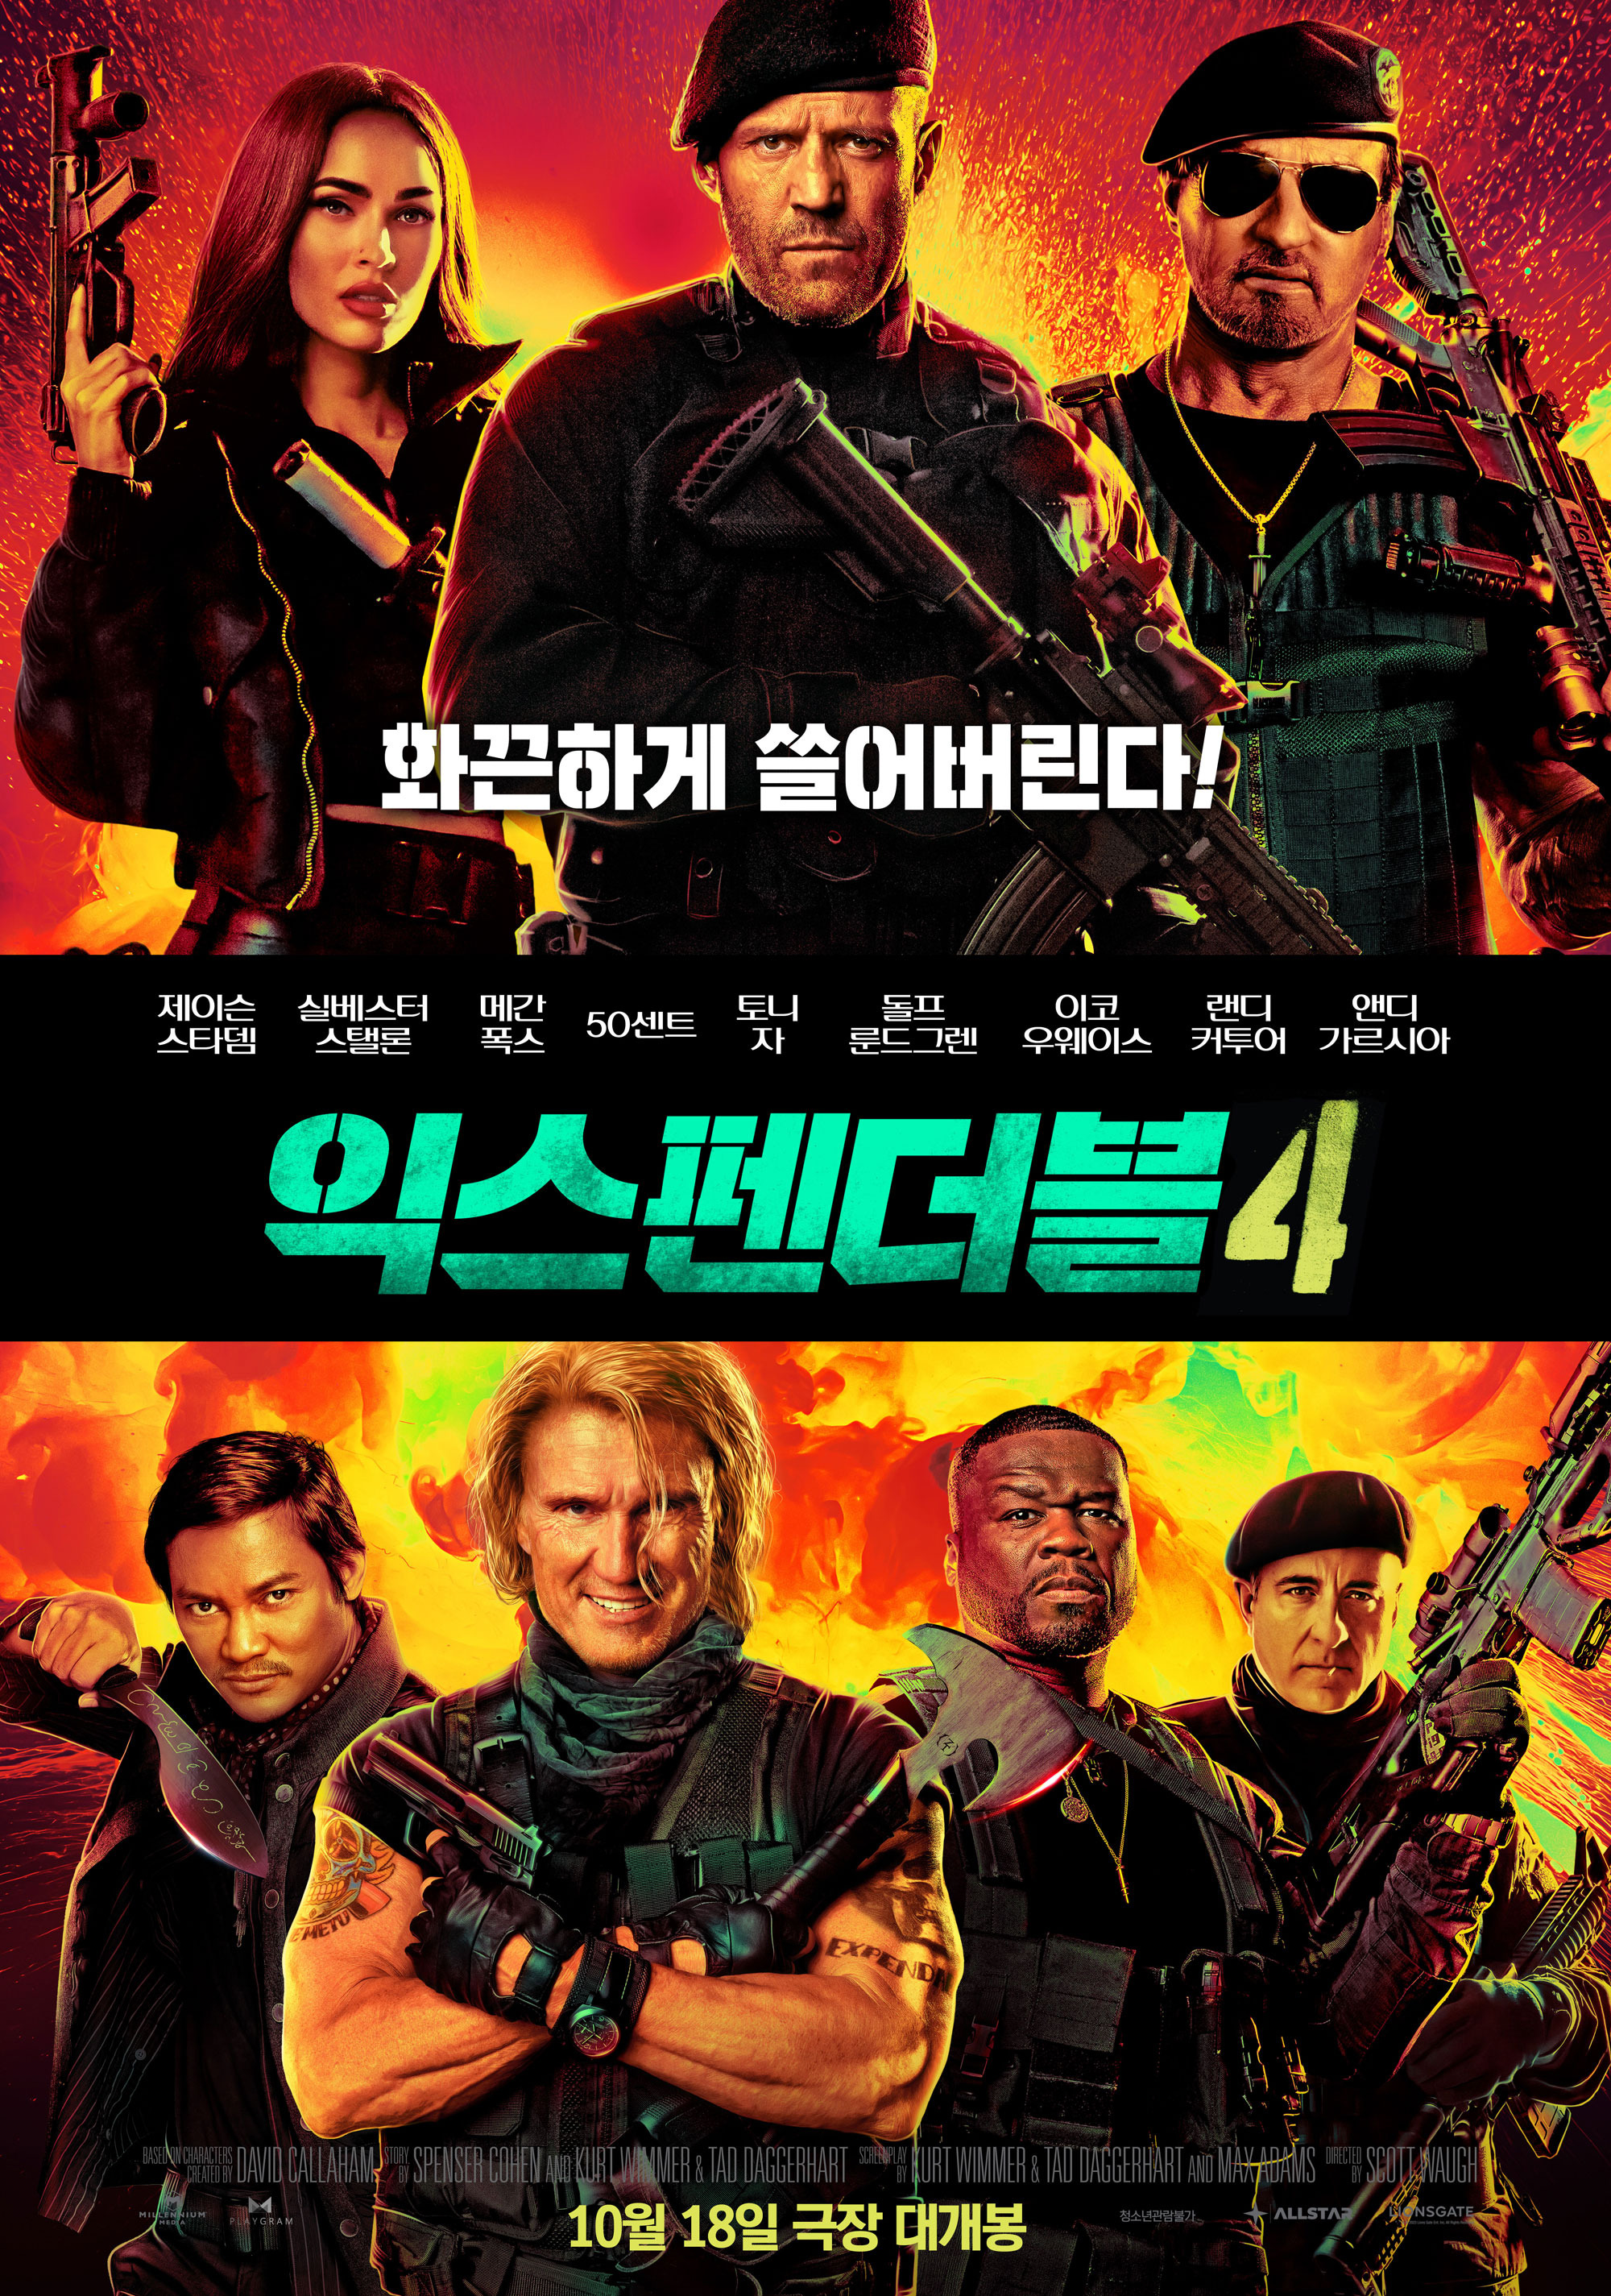 Mega Sized Movie Poster Image for Expendables 4 (#15 of 17)